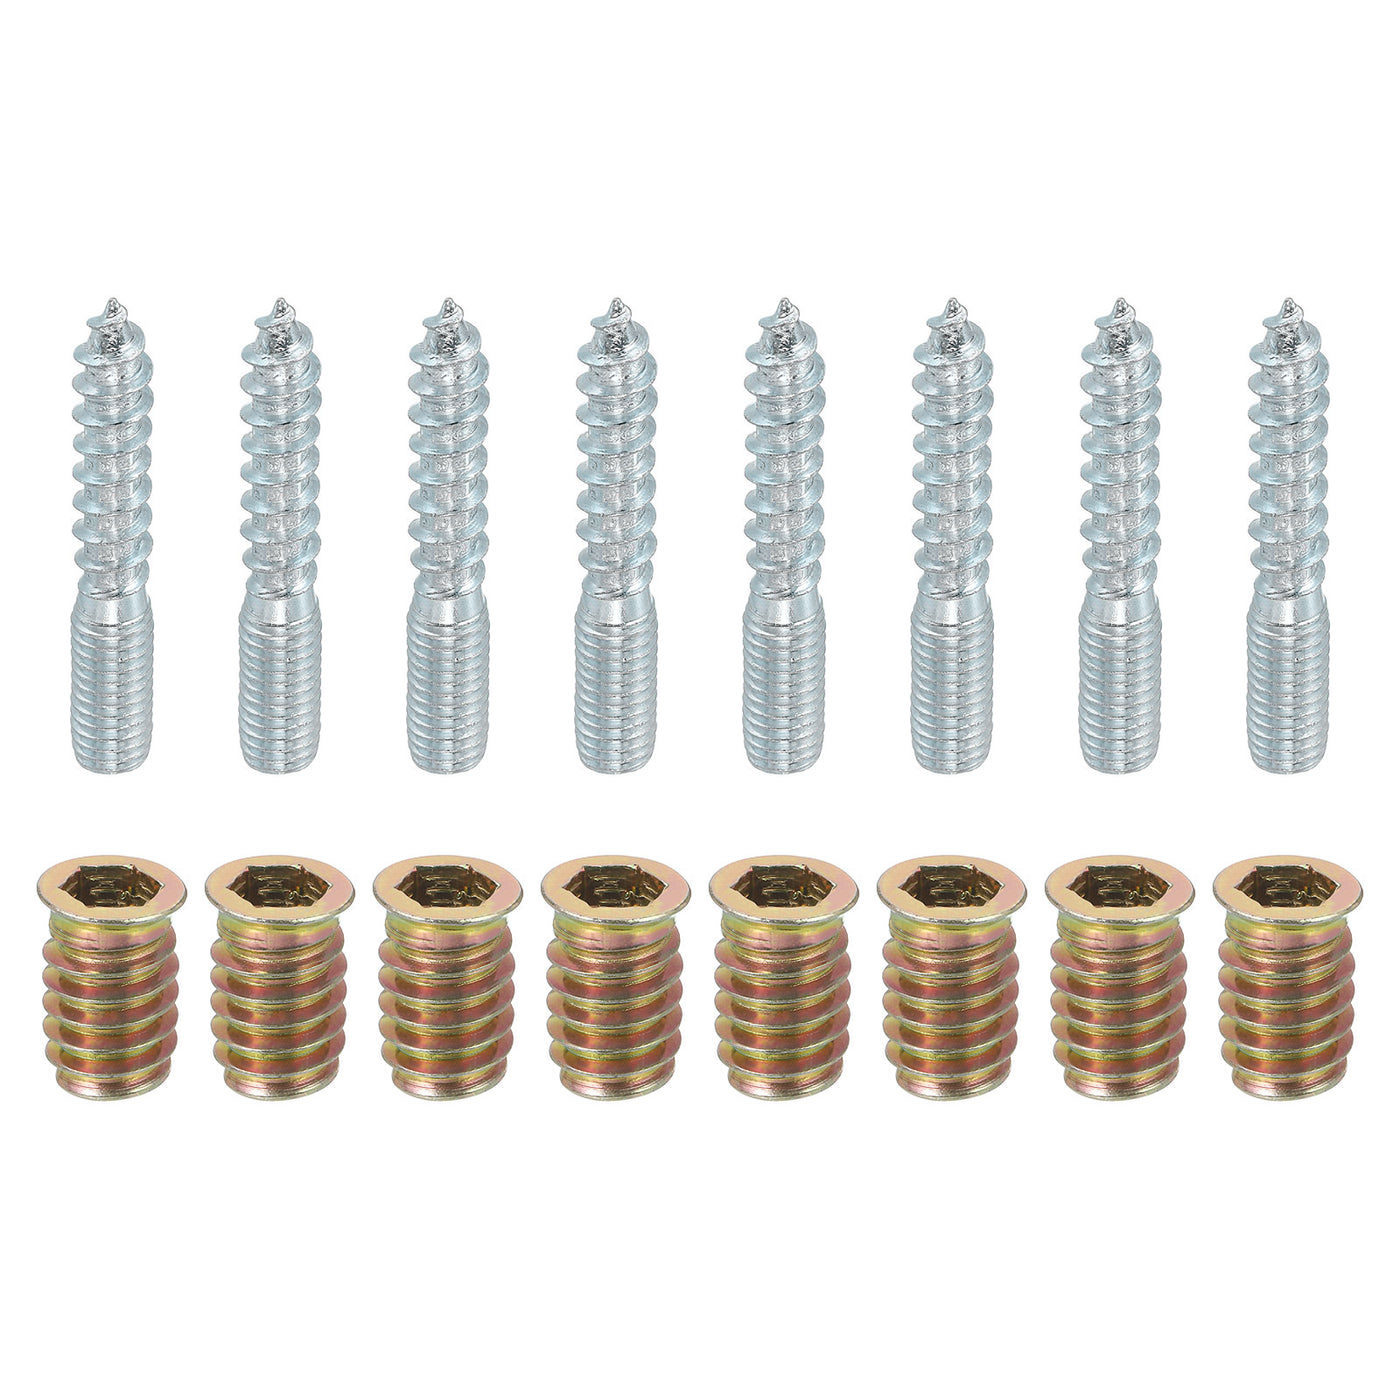 uxcell Uxcell 8pcs M8x50mm Hanger Bolts with 8pcs M8x20mm Threaded Insert Nuts Interface